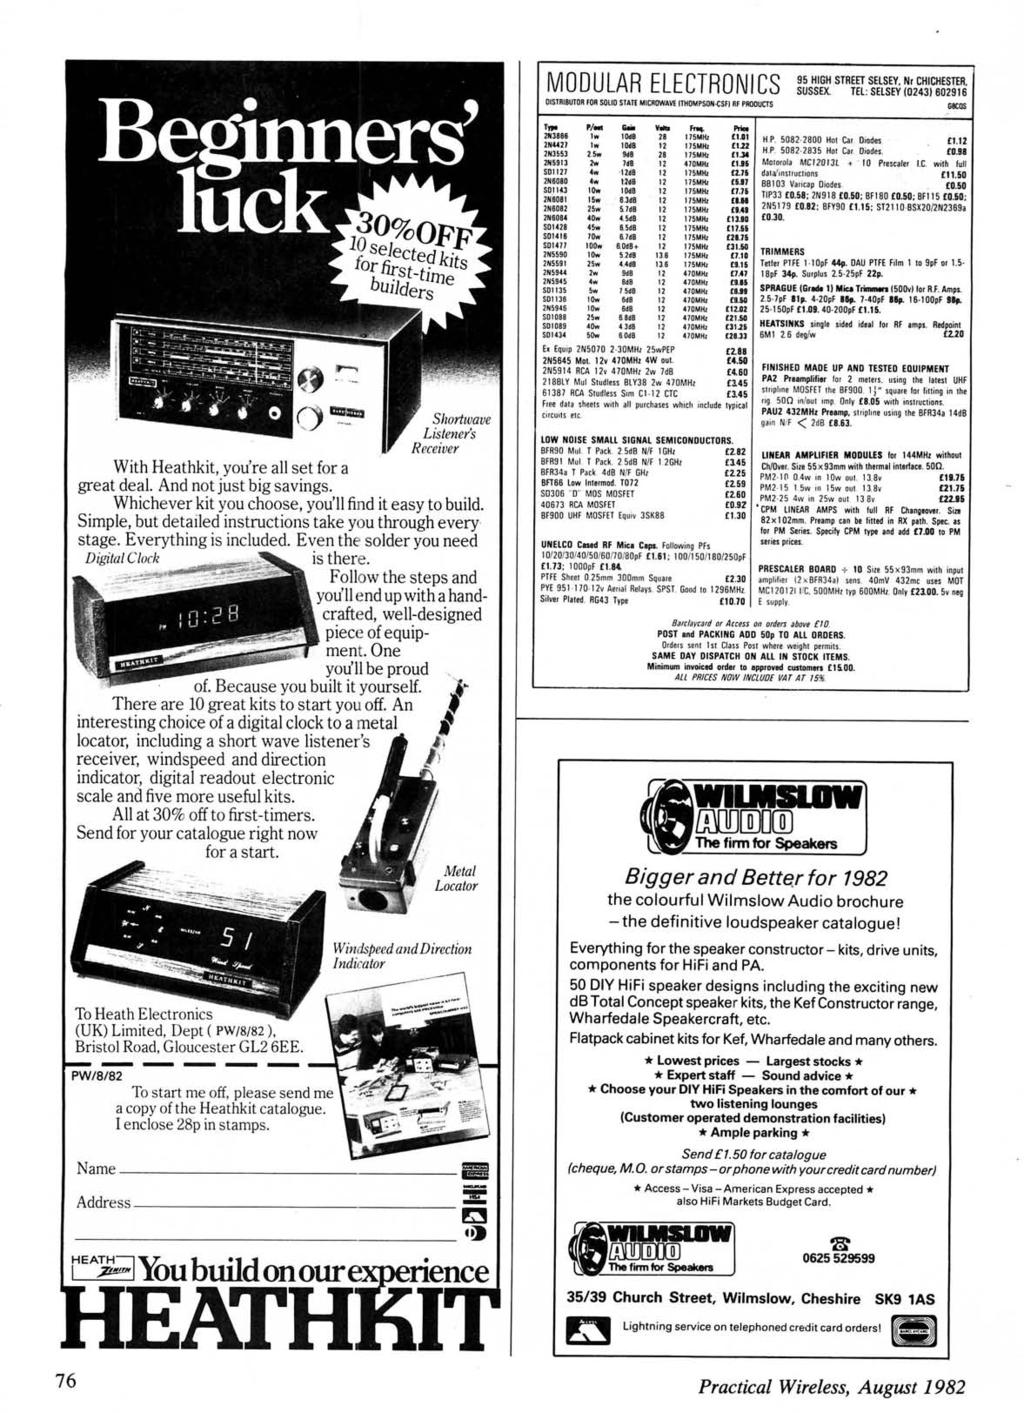 With Heathkit, you're all set for a great deal. And not just big savings. Whichever kit you choose, you' ll find it easy to build. Simple, but detailed instructions take you through every stage.